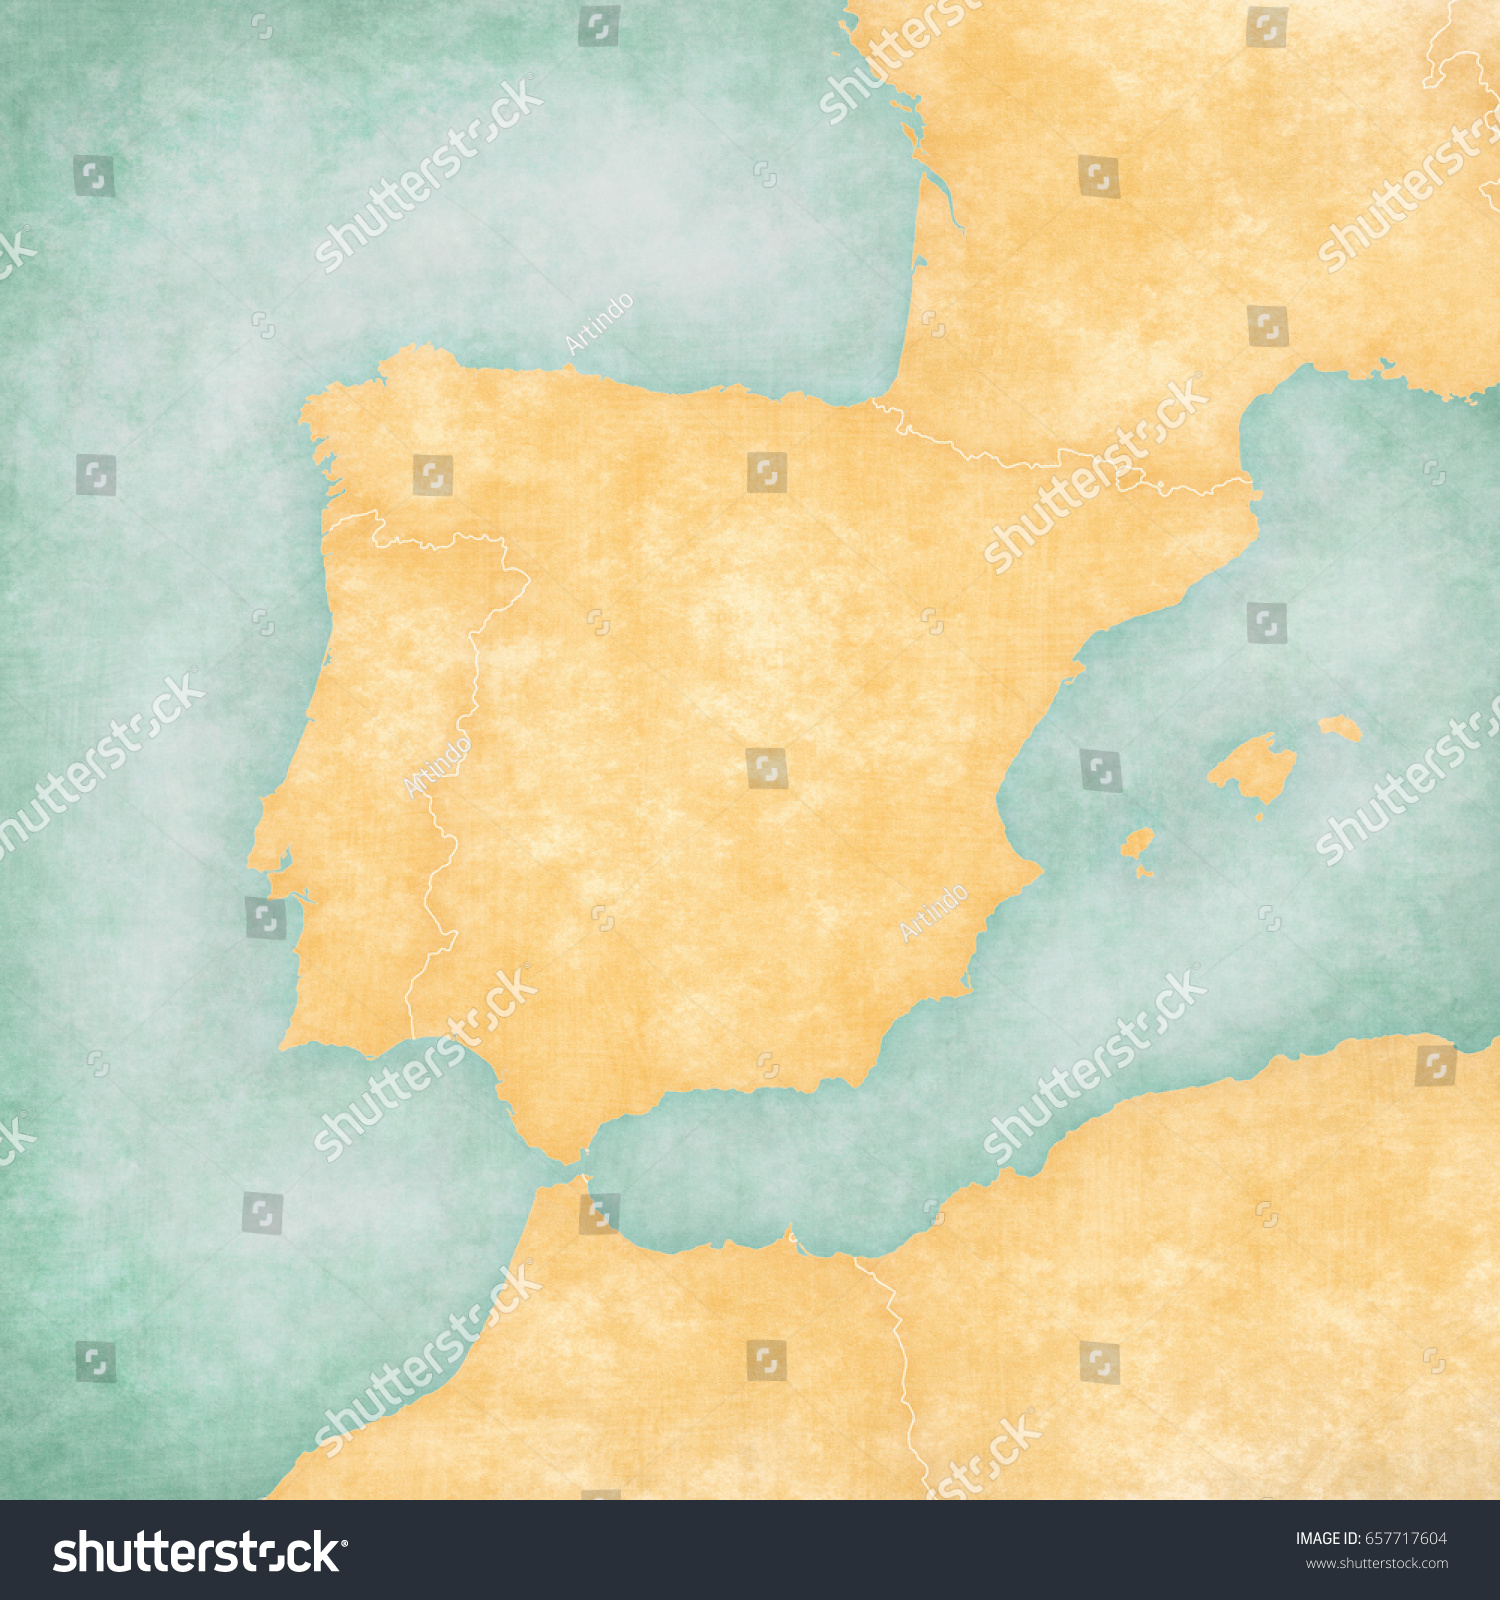 Stock Photo Blank Map Of Iberian Peninsula With Country Borders In Soft Grunge And Vintage Style On Old Paper 657717604 